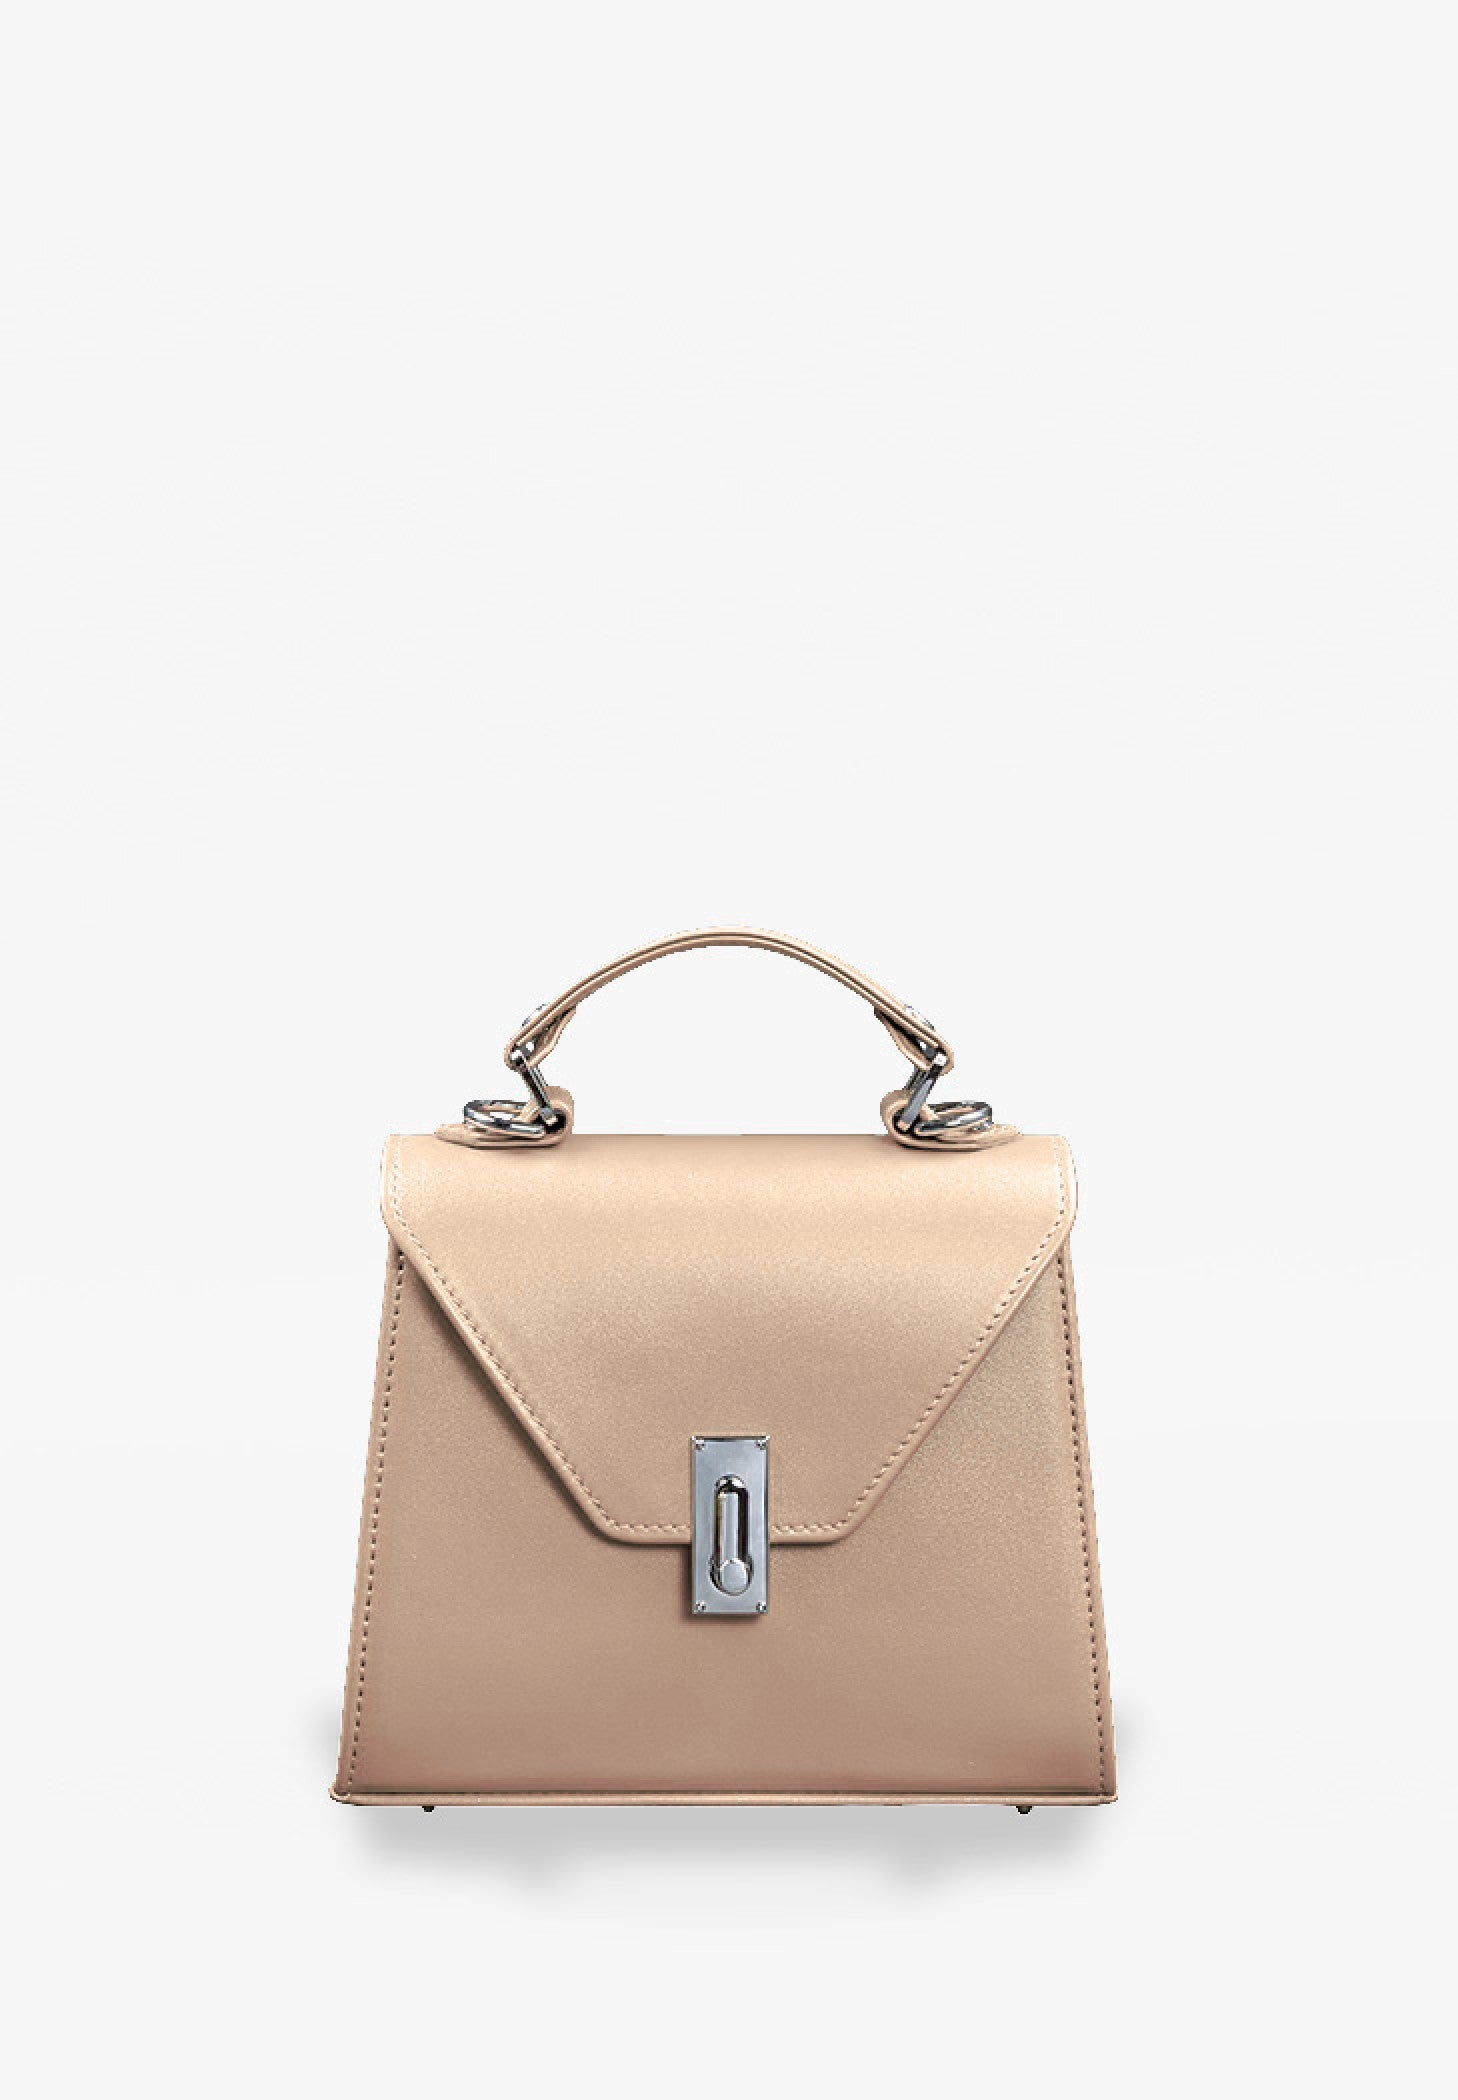 leather mid-sized bag for women in beige color